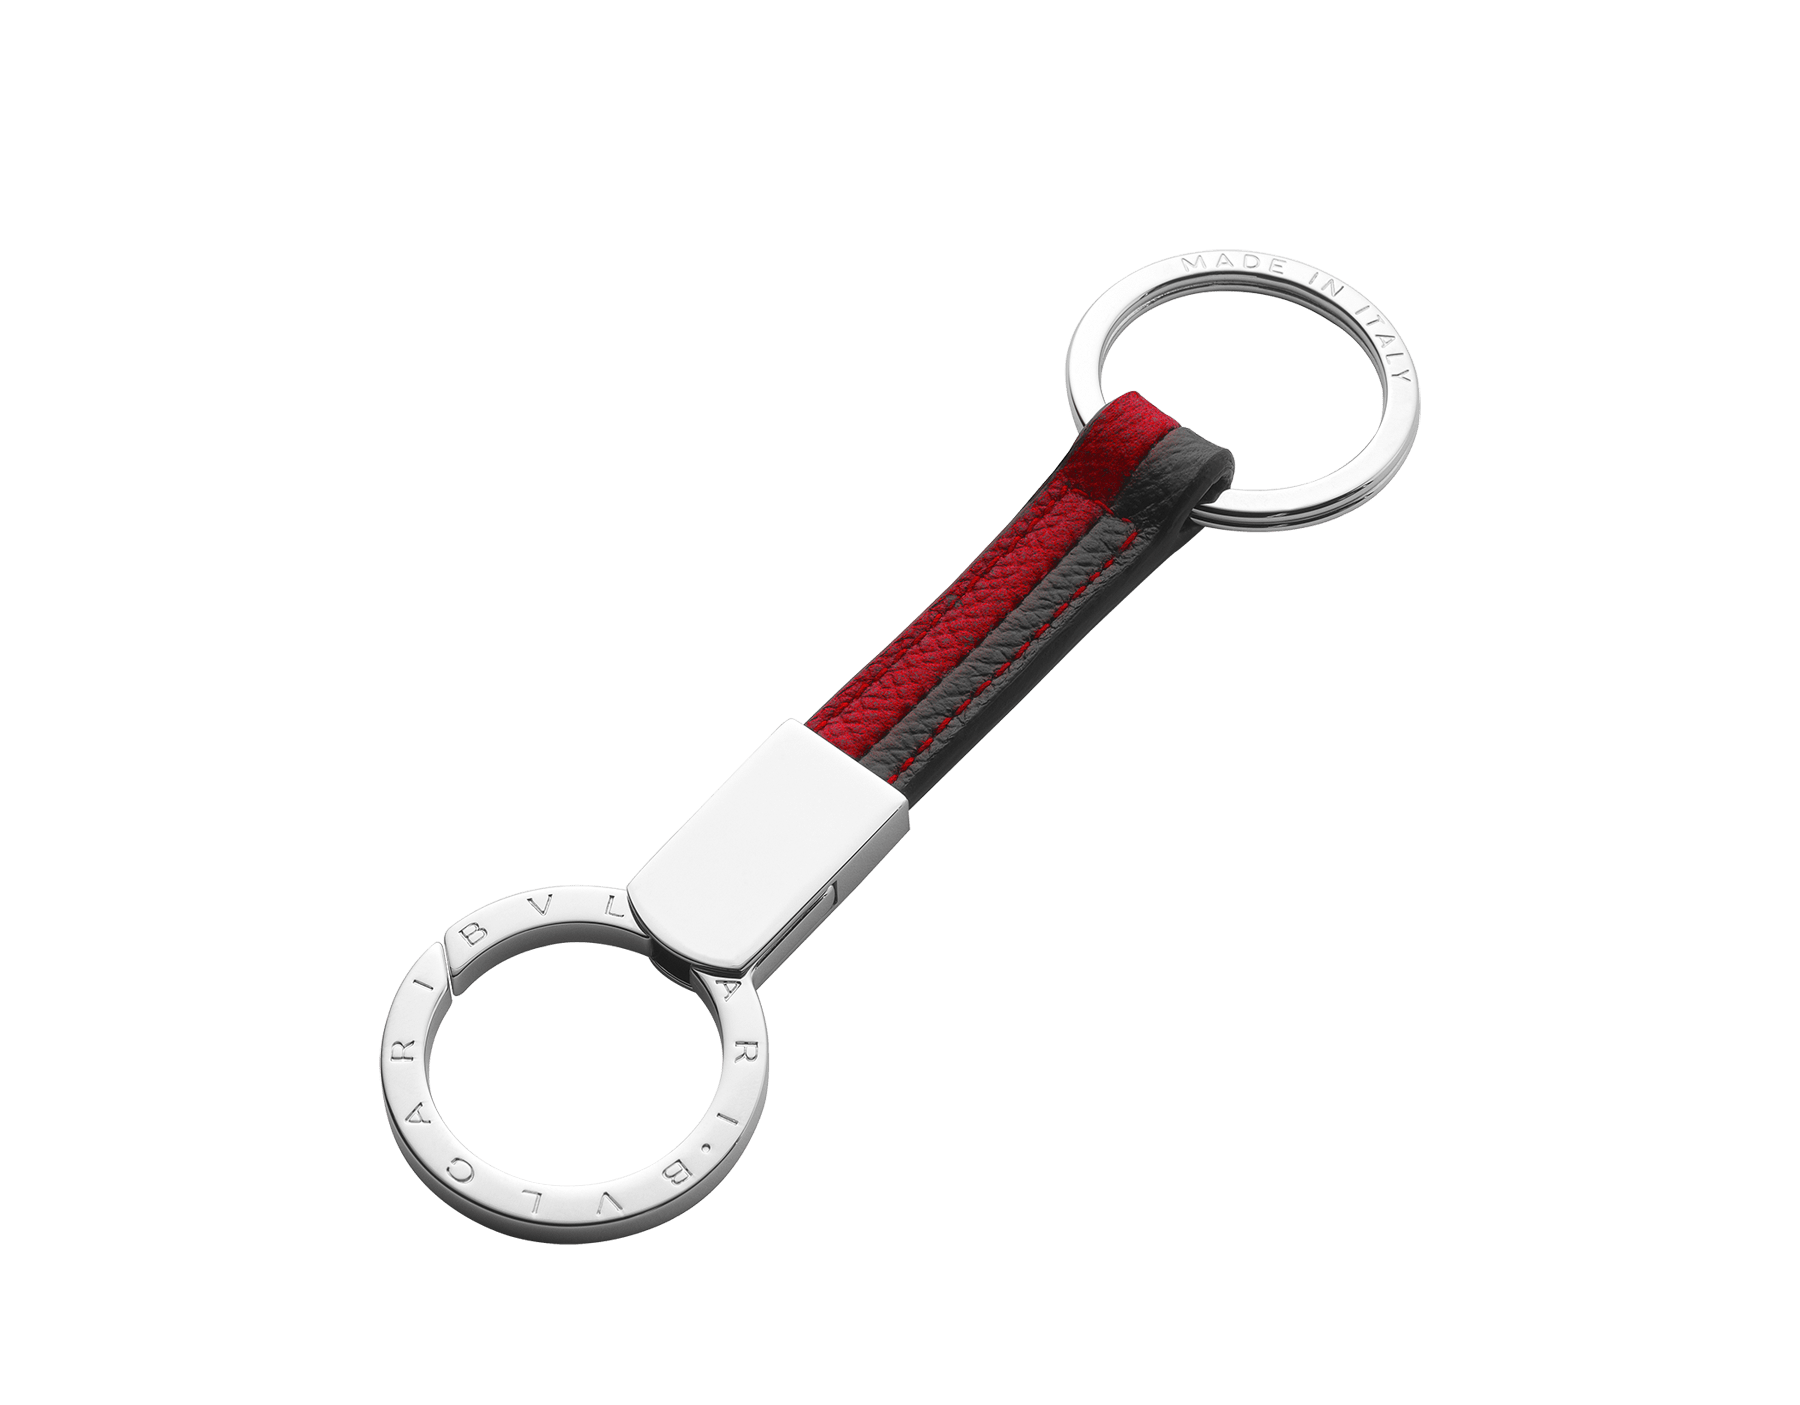 "BVLGARI BVLGARI" men's keyring in Deep Garnet bordeaux and Ivory Opal white grain calf leather. Complete with two palladium-plated brass rings with the iconic logo. BBM-KEYHOLD-STRAPb image 1